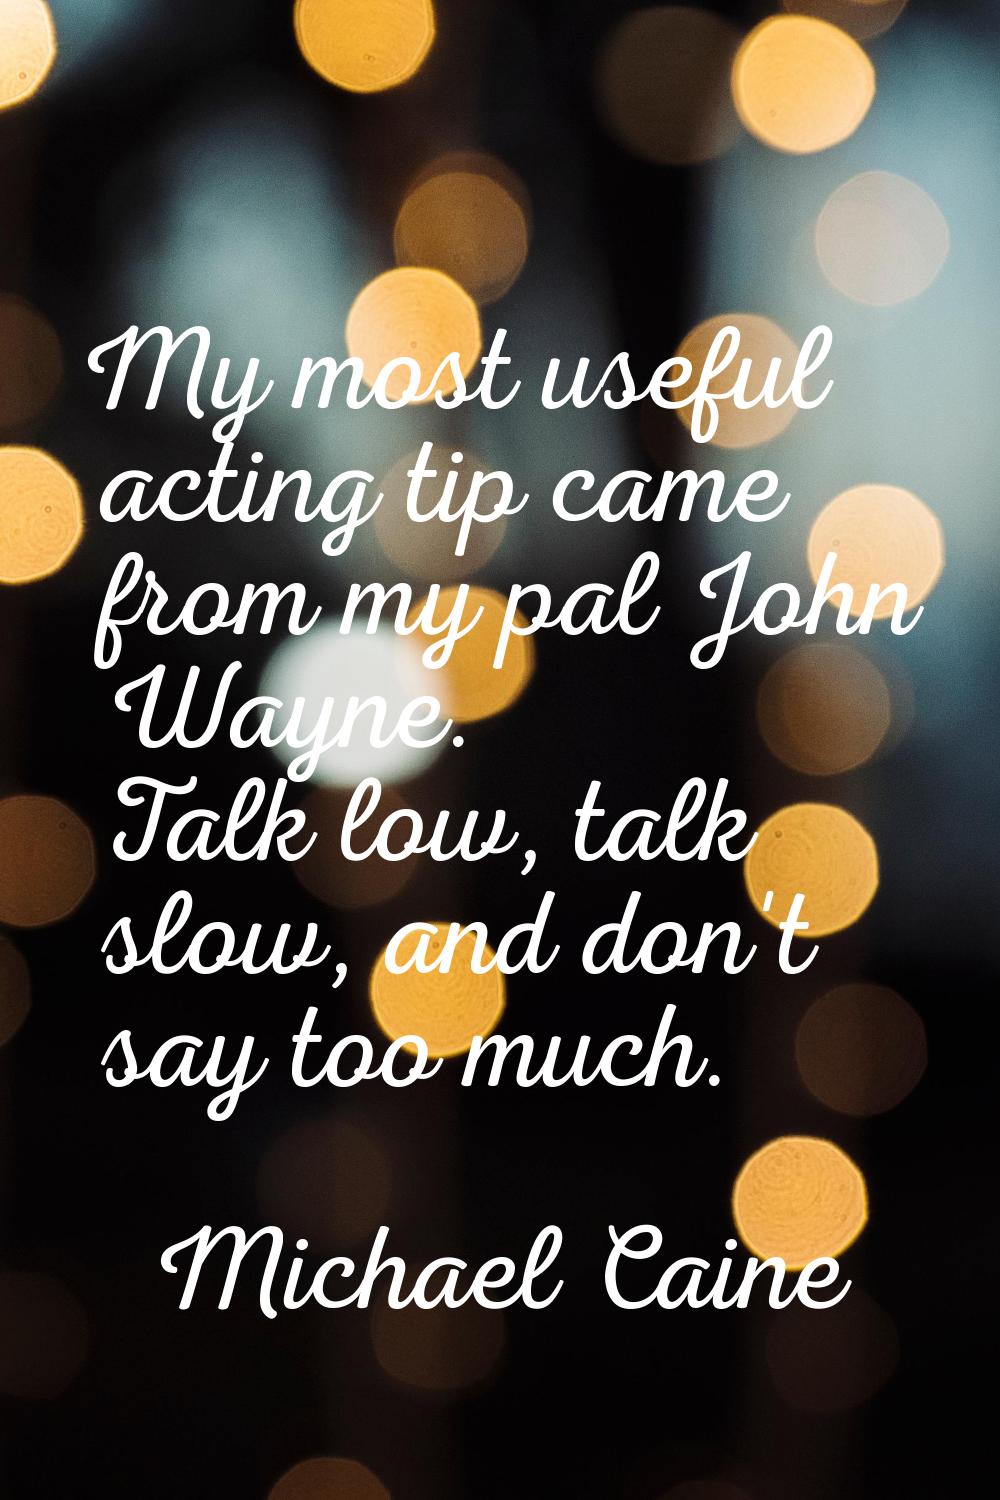 My most useful acting tip came from my pal John Wayne. Talk low, talk slow, and don't say too much.